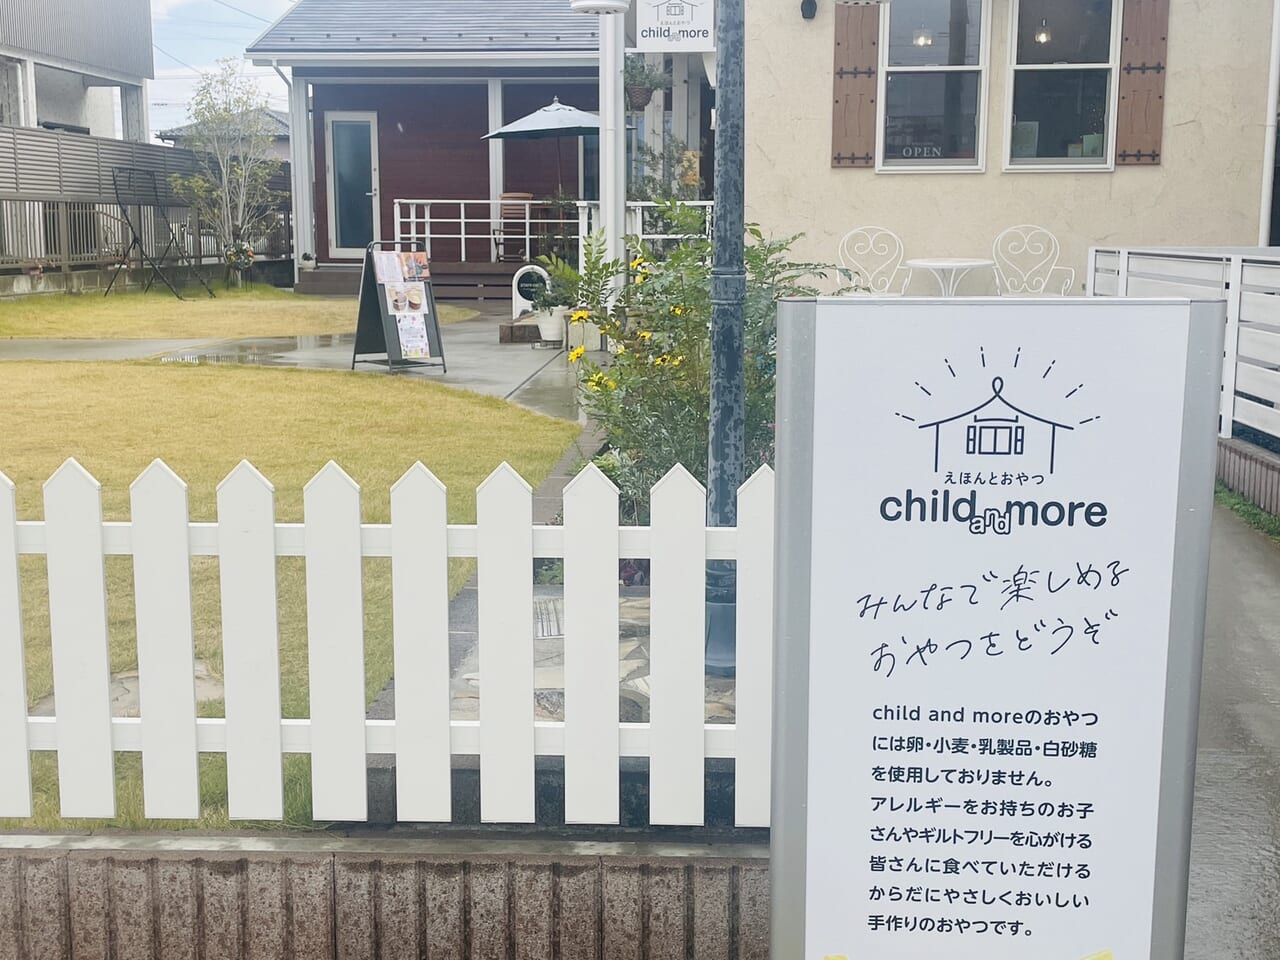 Child and more